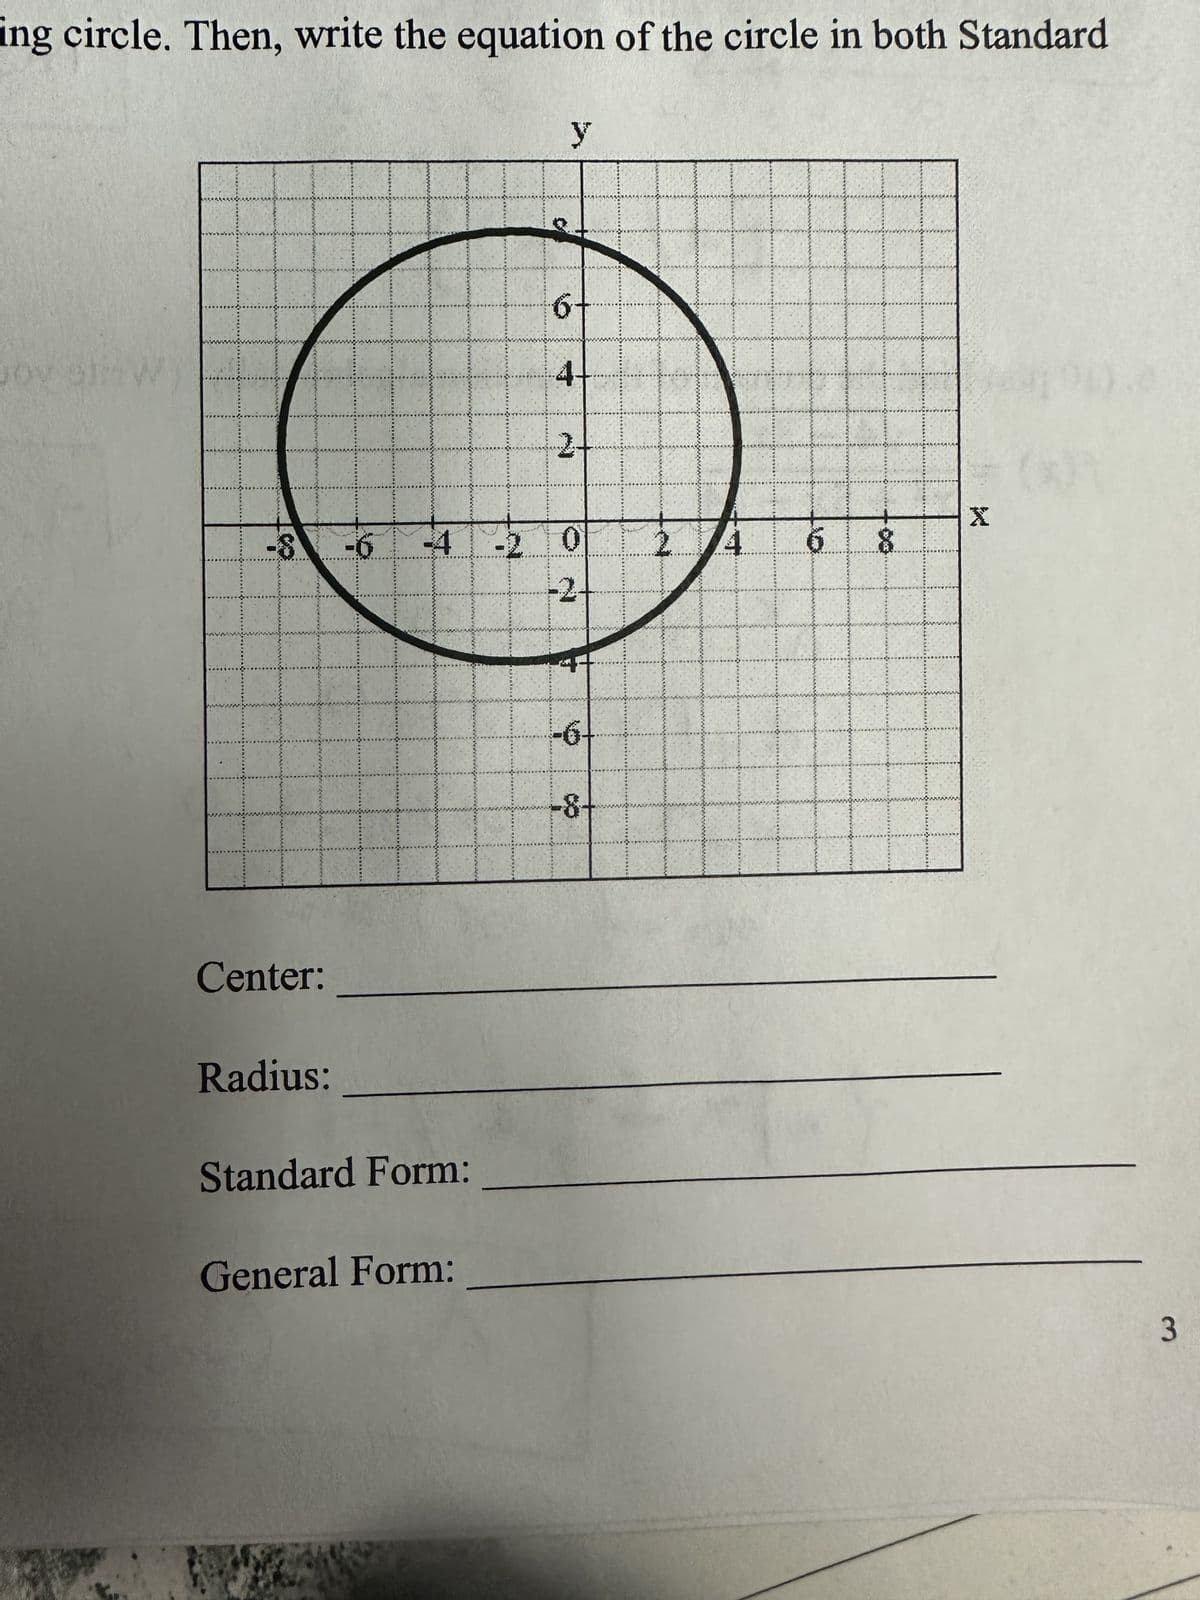 ing circle. Then, write the equation of the circle in both Standard
-8
Center:
Radius:
+
Standard Form:
General Form:
-2
y
6
4-
2-
01
-2-
-6.
-8-
6
8
X
3